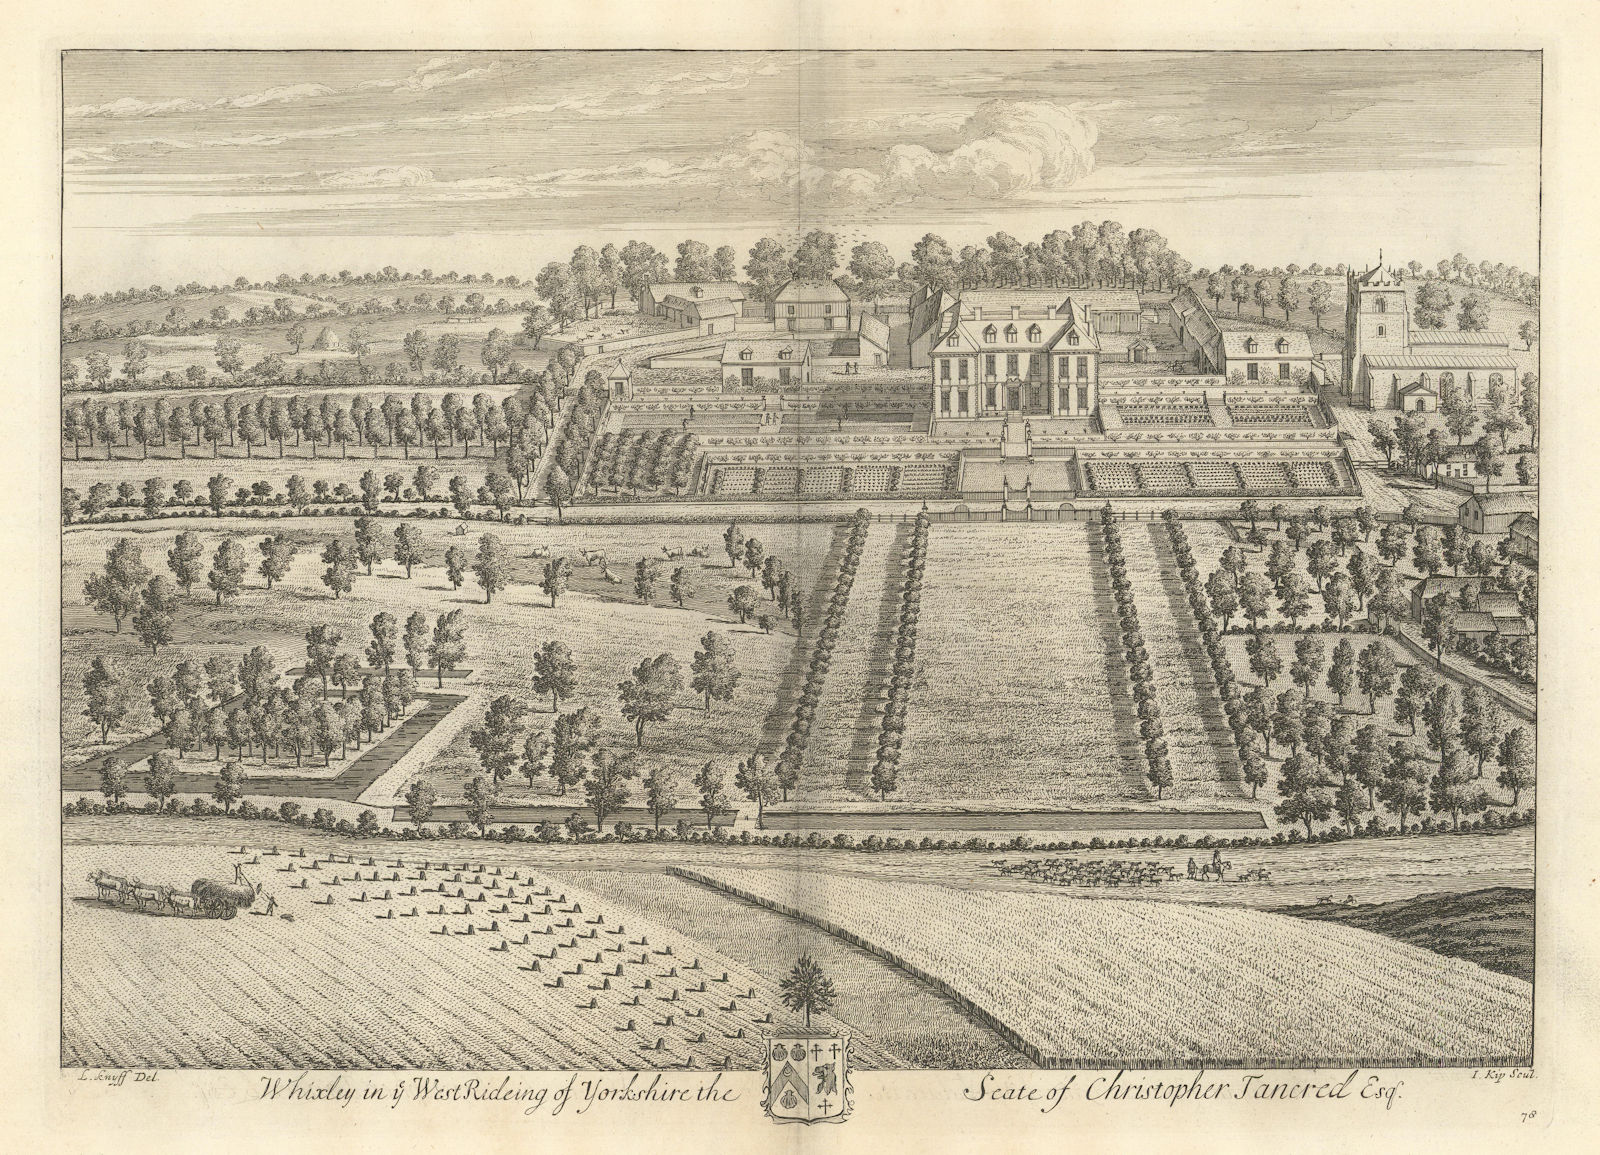 Whixley Hall by Kip & Knyff. "Whixley in ye West Rideing of Yorkshire" 1709